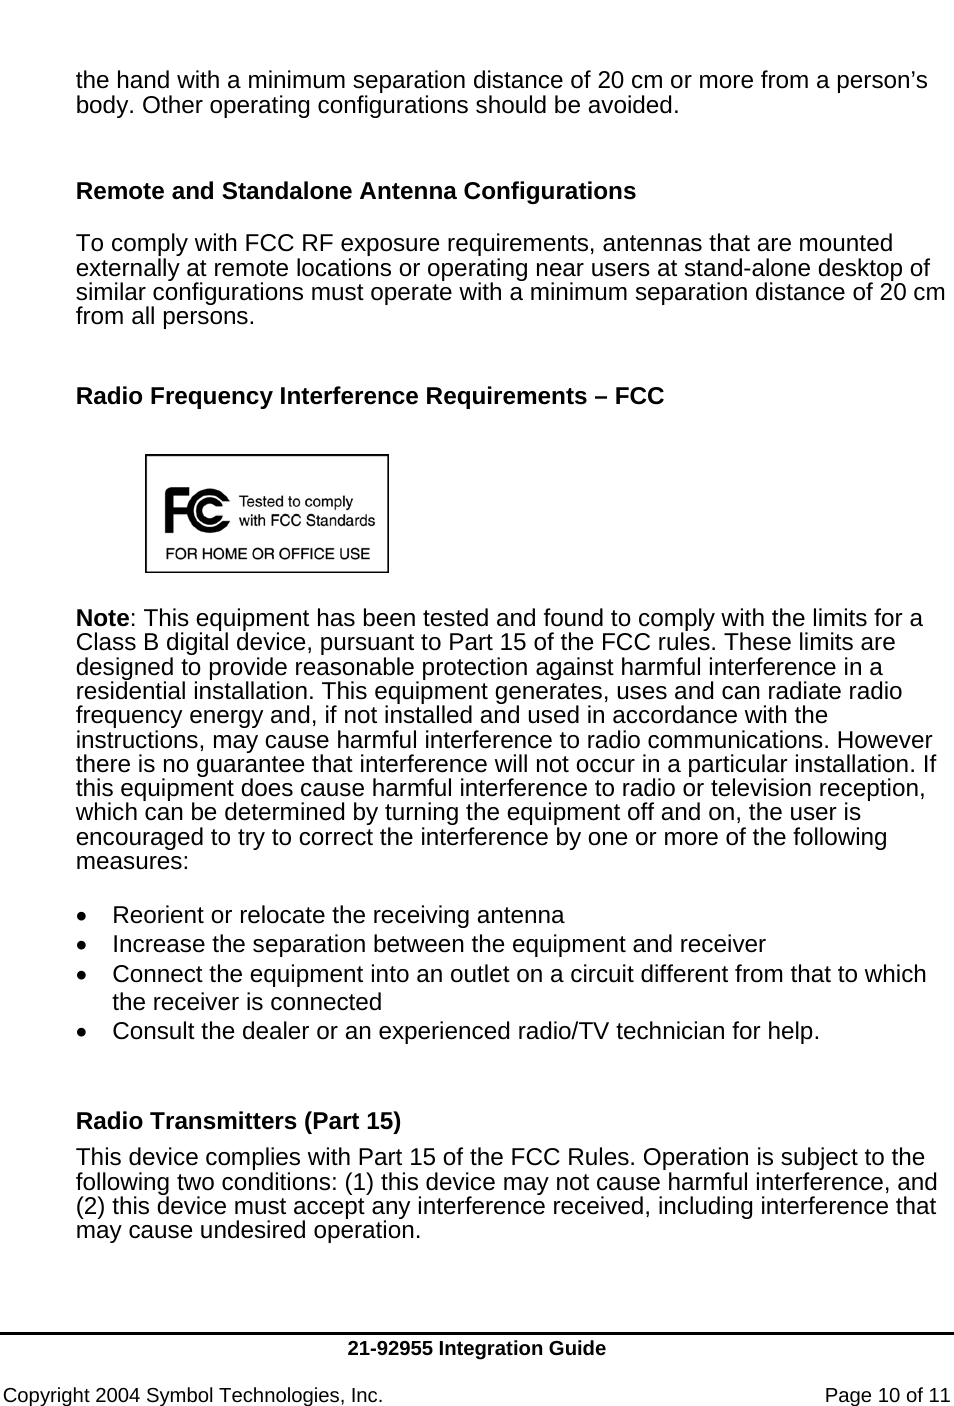     21-92955 Integration Guide  Copyright 2004 Symbol Technologies, Inc.    Page 10 of 11  the hand with a minimum separation distance of 20 cm or more from a person’s body. Other operating configurations should be avoided.  Remote and Standalone Antenna Configurations  To comply with FCC RF exposure requirements, antennas that are mounted externally at remote locations or operating near users at stand-alone desktop of similar configurations must operate with a minimum separation distance of 20 cm from all persons.    Radio Frequency Interference Requirements – FCC         Note: This equipment has been tested and found to comply with the limits for a Class B digital device, pursuant to Part 15 of the FCC rules. These limits are designed to provide reasonable protection against harmful interference in a residential installation. This equipment generates, uses and can radiate radio frequency energy and, if not installed and used in accordance with the instructions, may cause harmful interference to radio communications. However there is no guarantee that interference will not occur in a particular installation. If this equipment does cause harmful interference to radio or television reception, which can be determined by turning the equipment off and on, the user is encouraged to try to correct the interference by one or more of the following measures:  •  Reorient or relocate the receiving antenna •  Increase the separation between the equipment and receiver •  Connect the equipment into an outlet on a circuit different from that to which the receiver is connected •  Consult the dealer or an experienced radio/TV technician for help.  Radio Transmitters (Part 15) This device complies with Part 15 of the FCC Rules. Operation is subject to the following two conditions: (1) this device may not cause harmful interference, and (2) this device must accept any interference received, including interference that may cause undesired operation.   